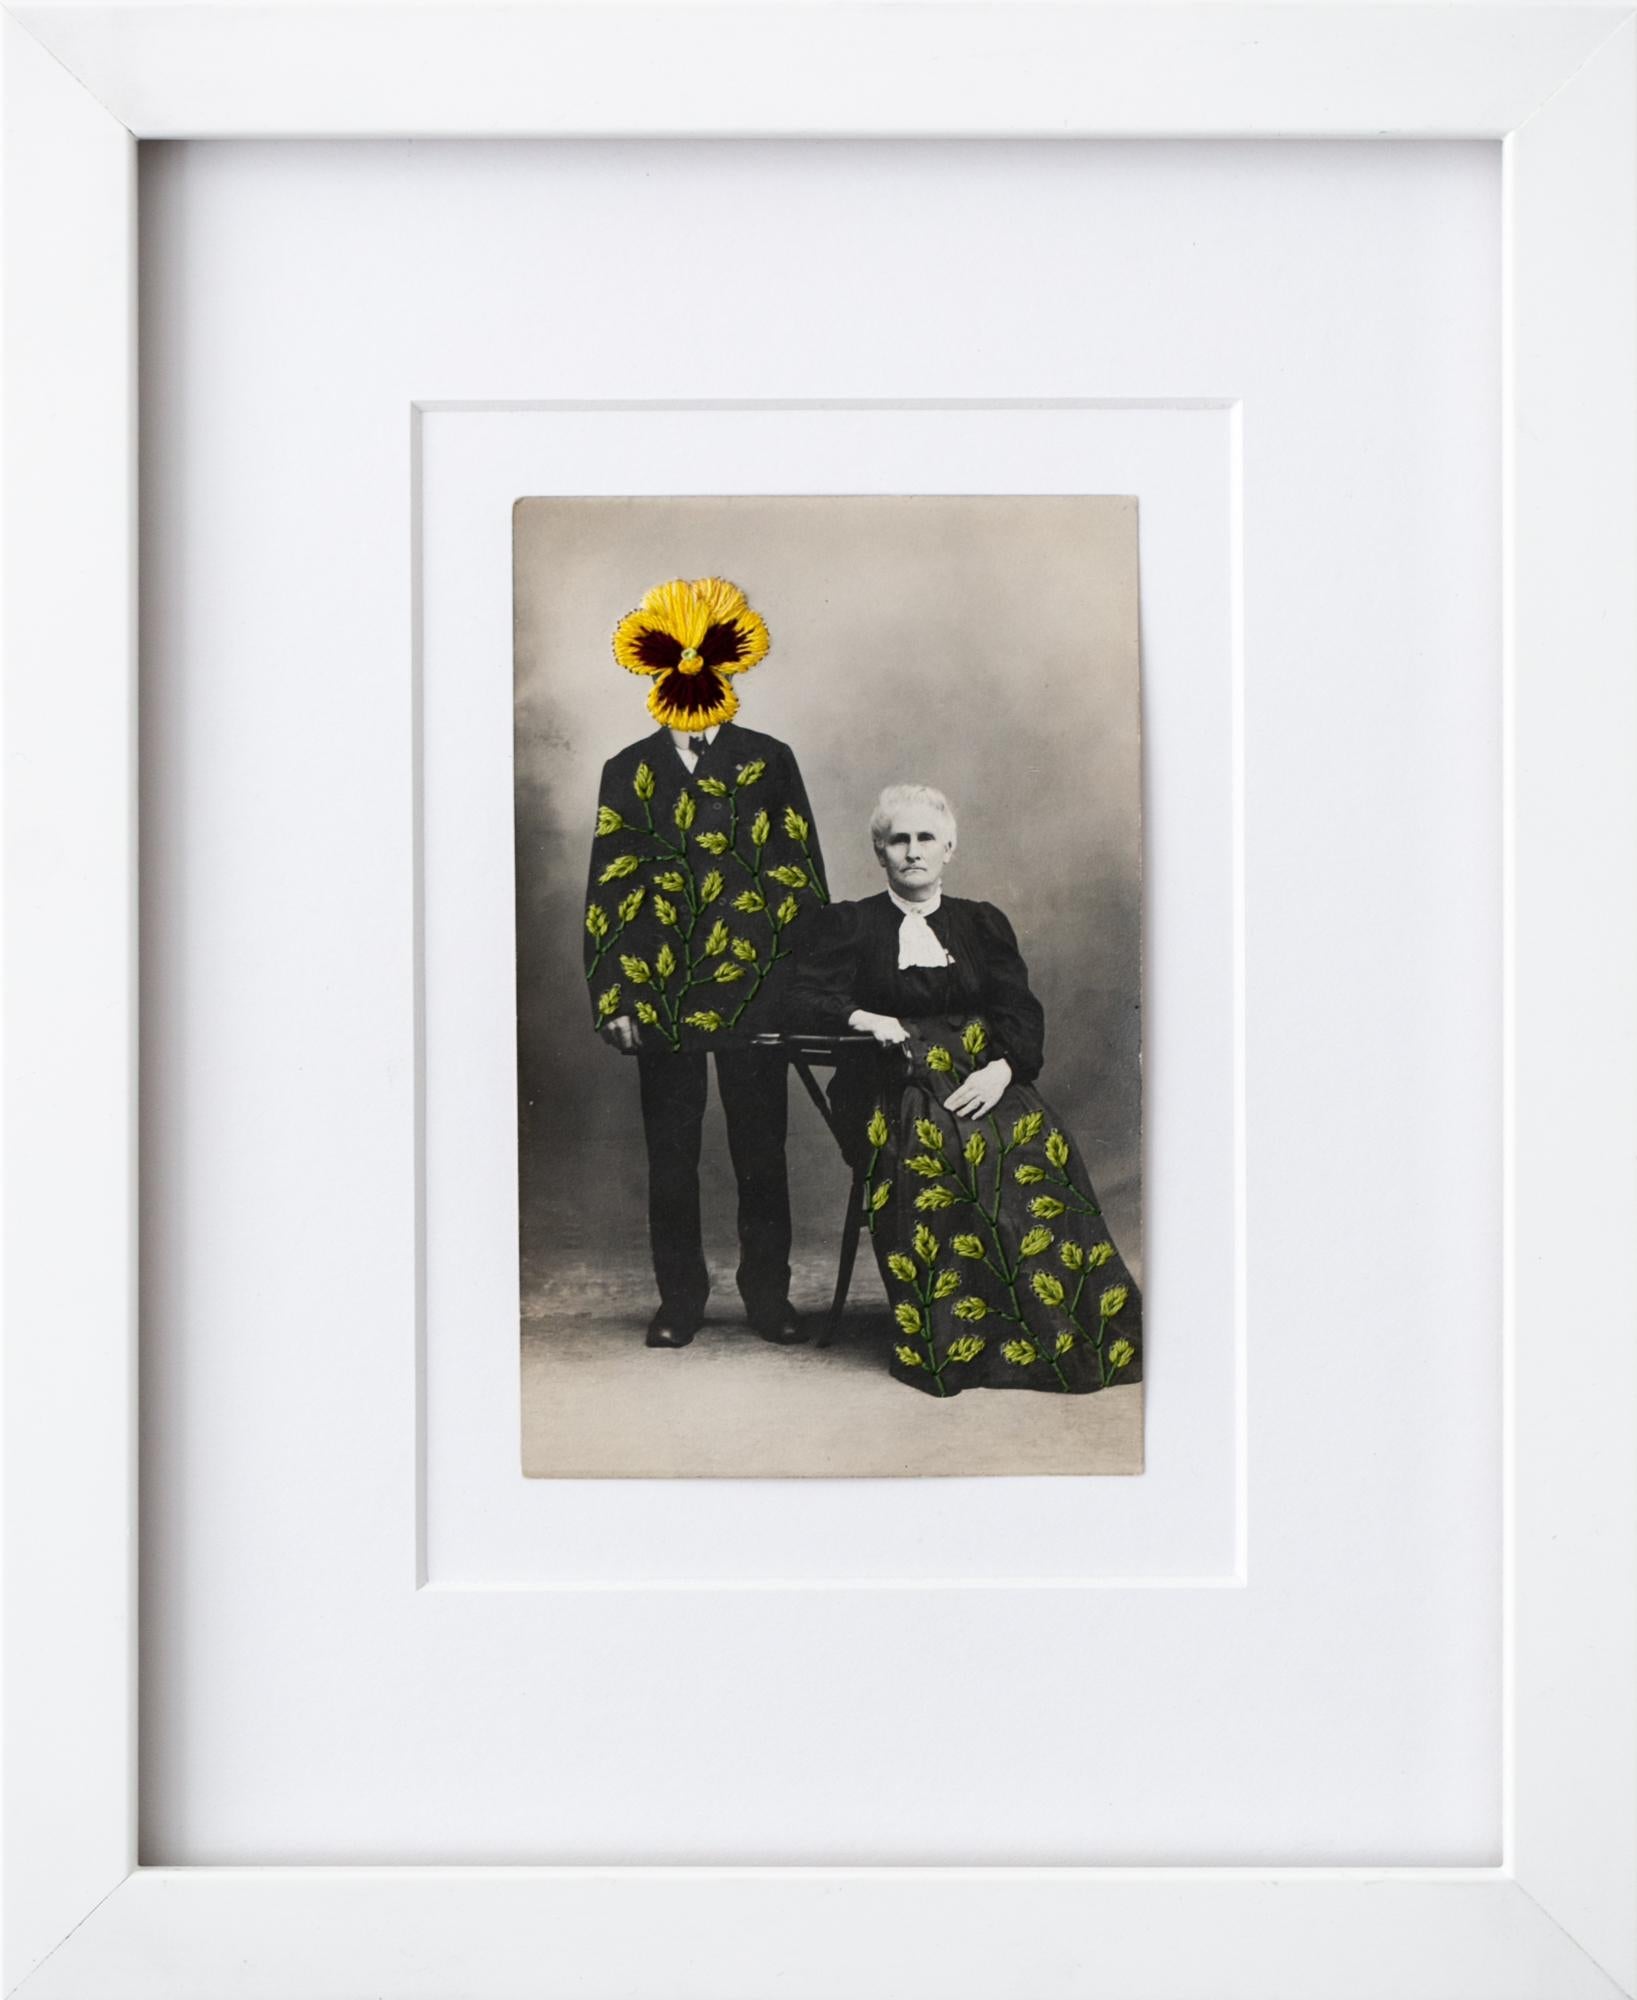 "Wallflowers: Yellow pansy", Floral Motif Surreal Hand-Embroidered Photograph - Mixed Media Art by Han Cao